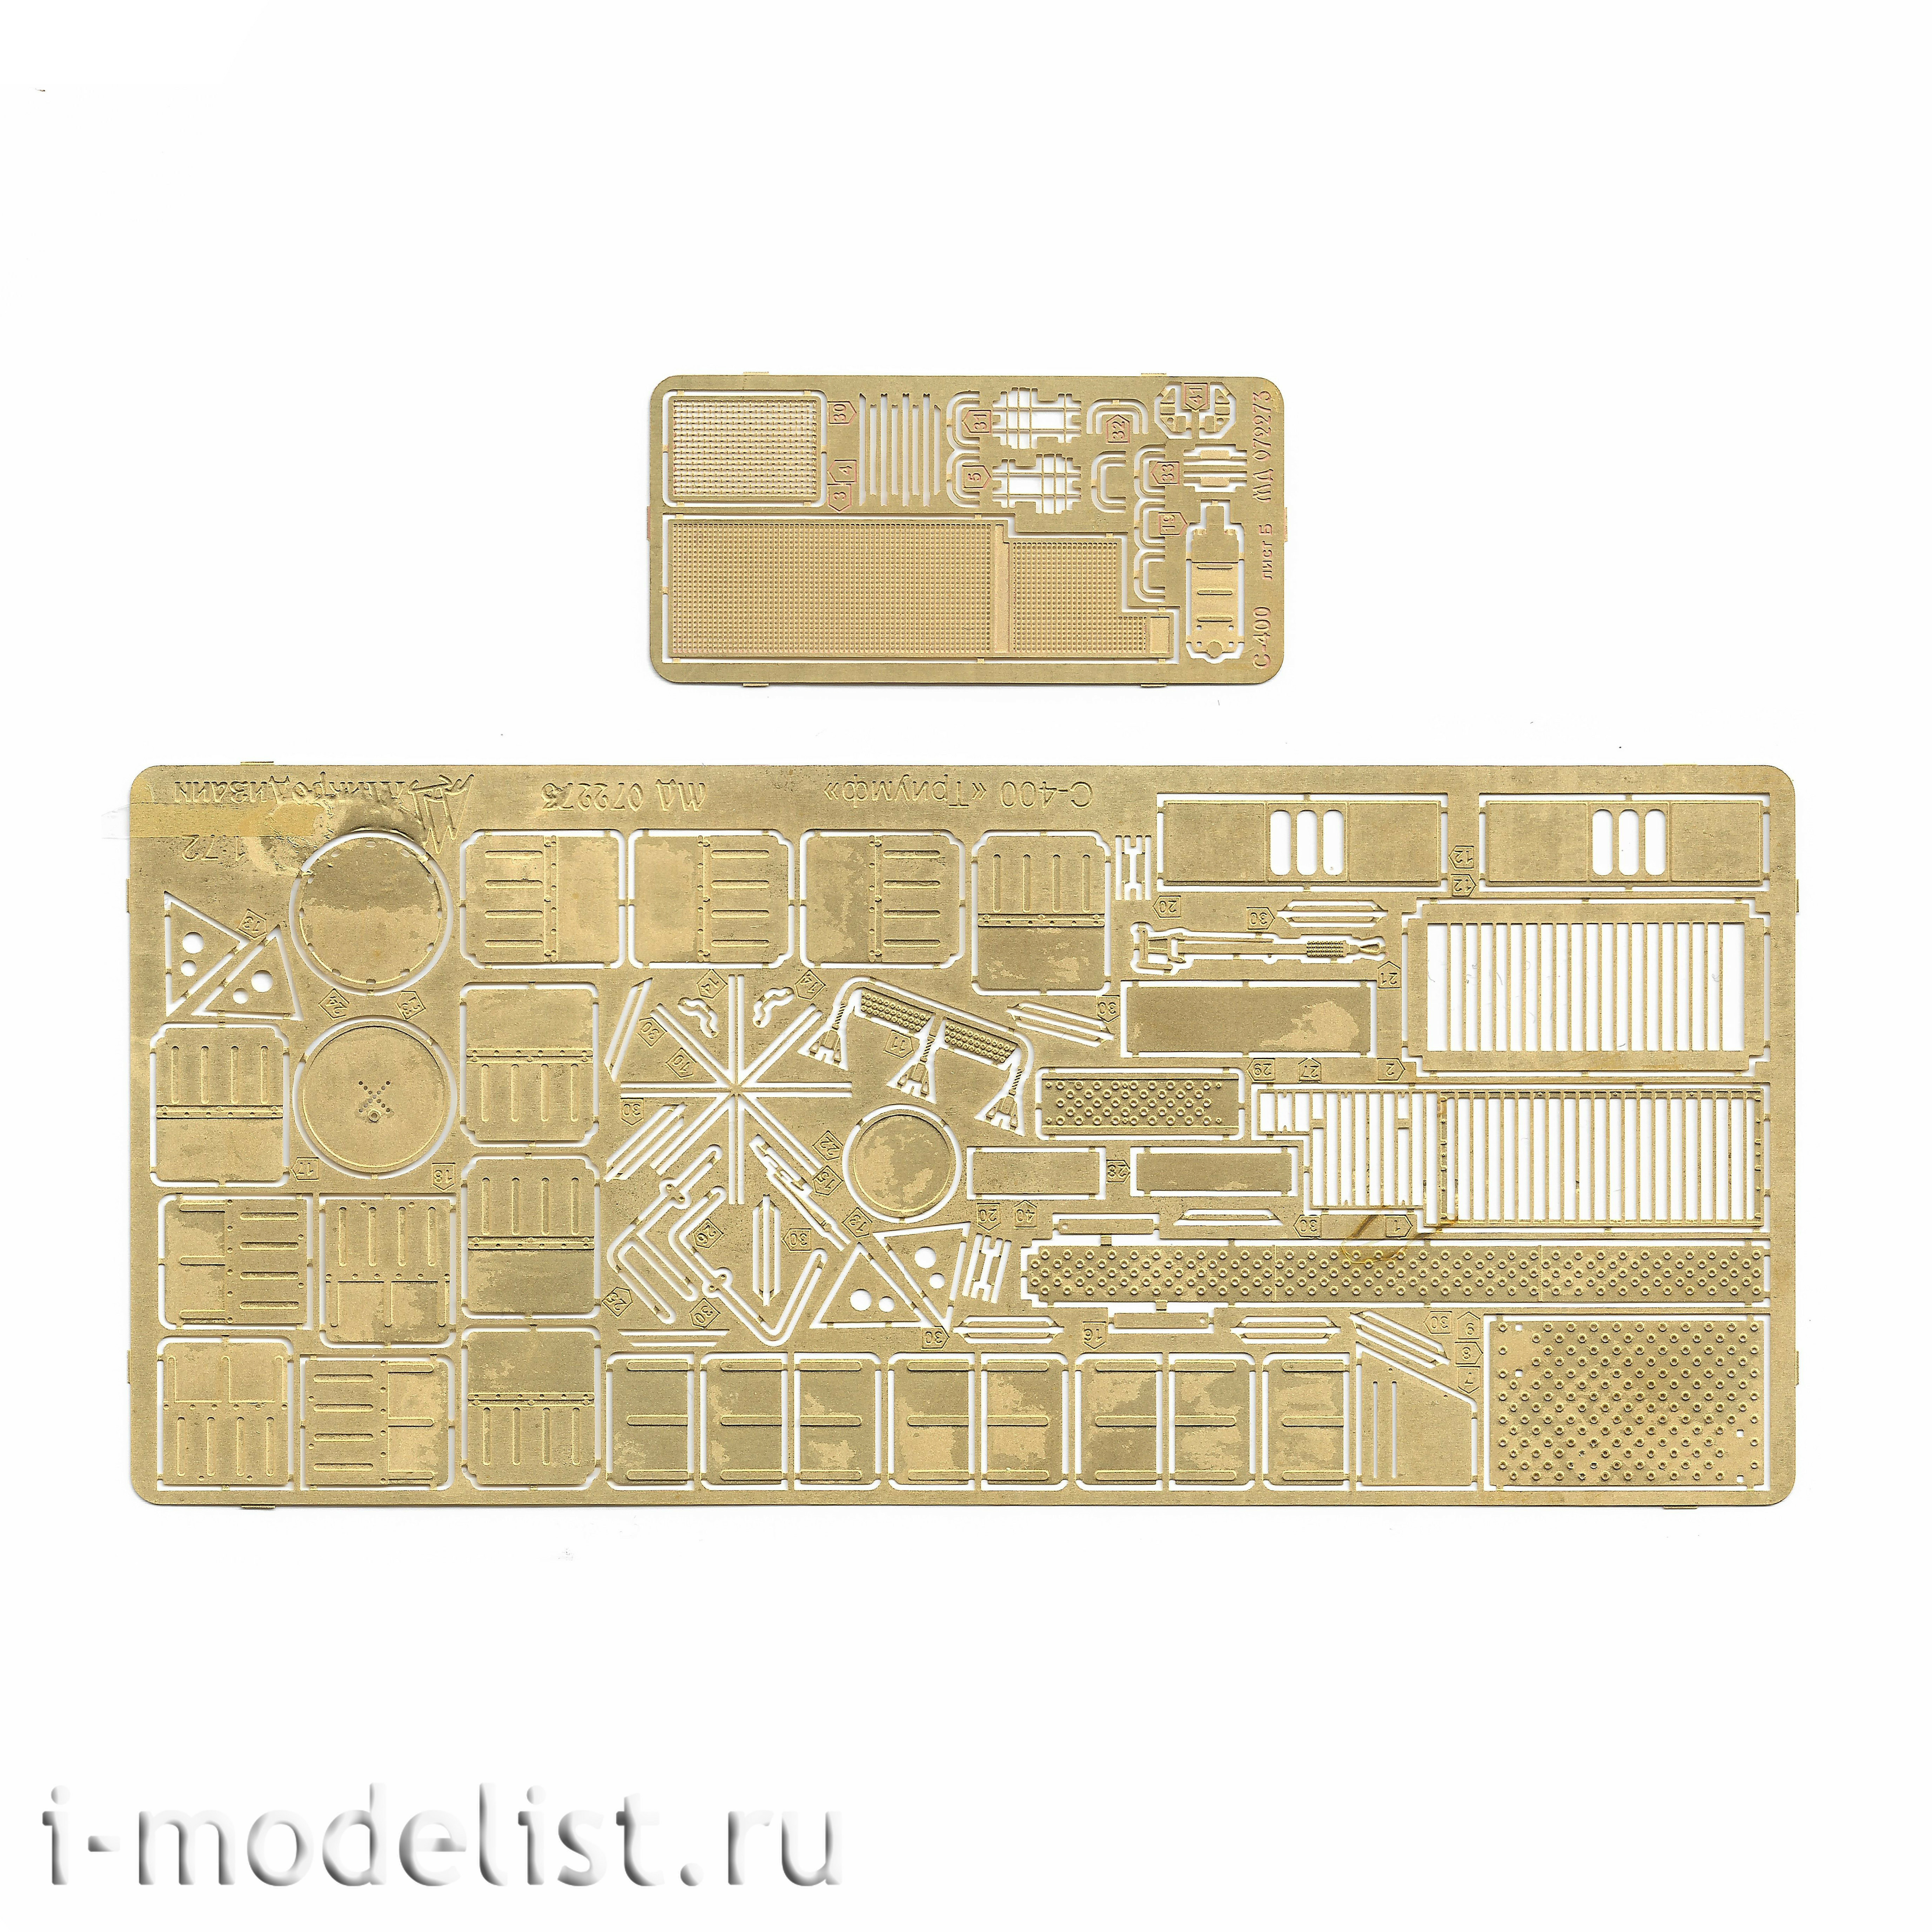 072273 Microdesign 1/72 Photo Etching kit for S-400 